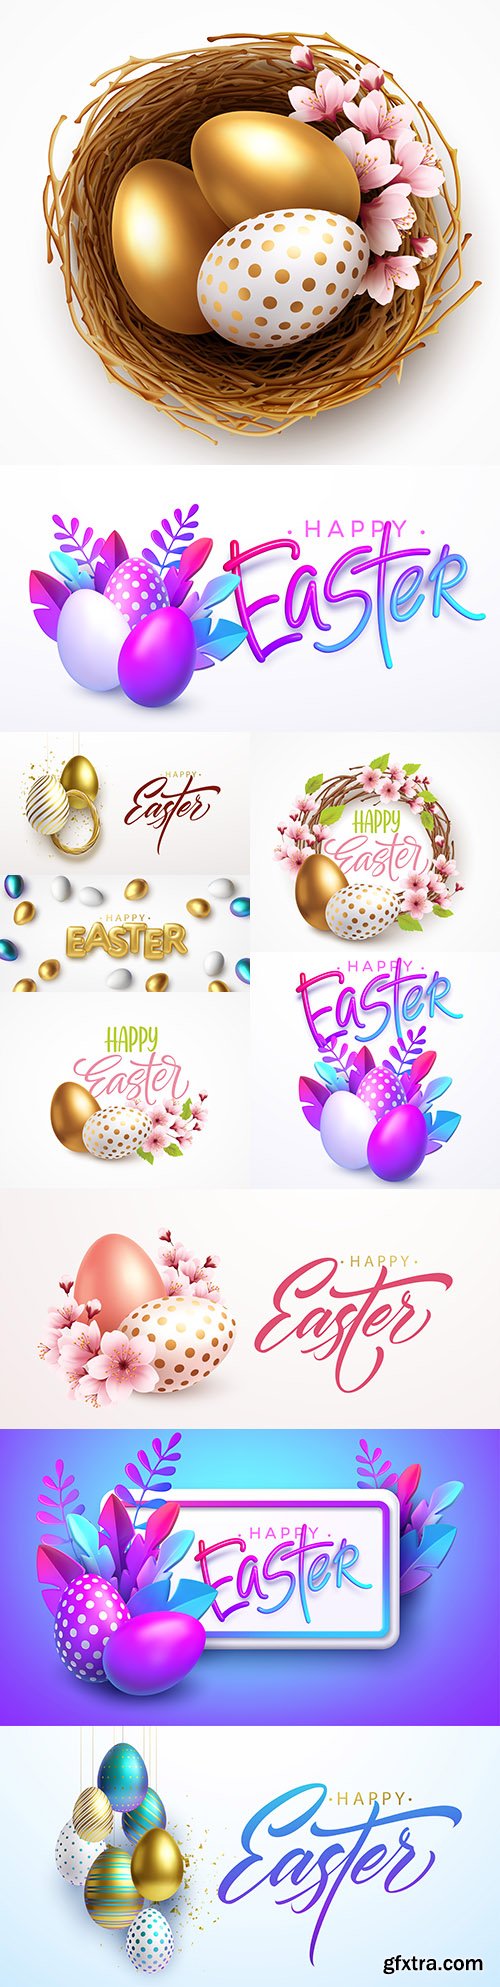 Happy Easter background with realistic eggs and spring flowers